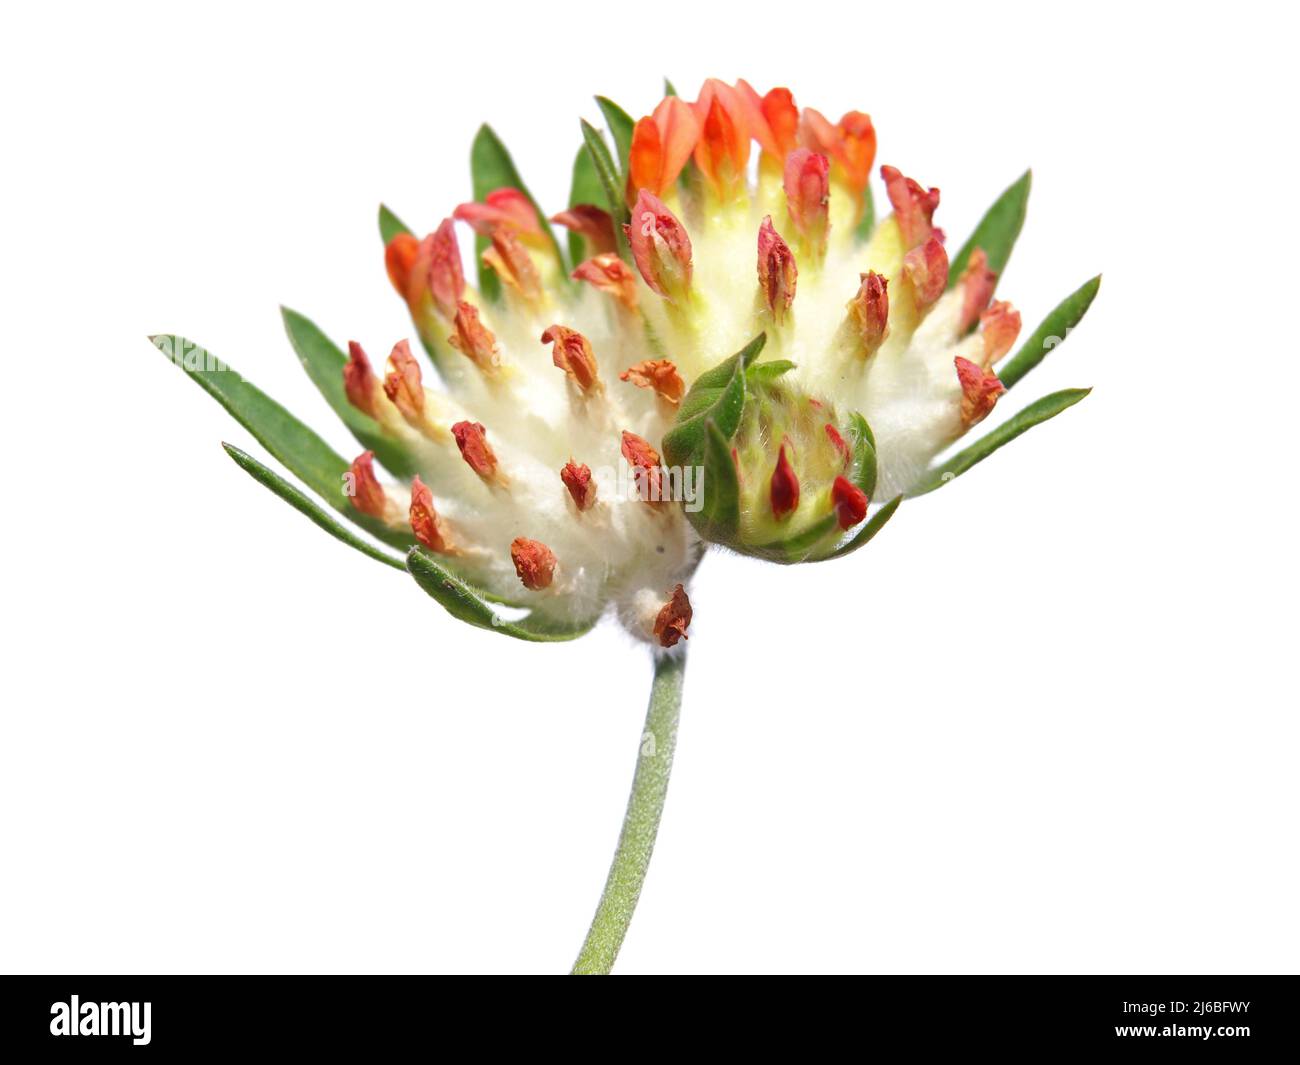 Flower head of kidney vetch isolated on white. Anthyllis vulneraria var. coccinea Stock Photo